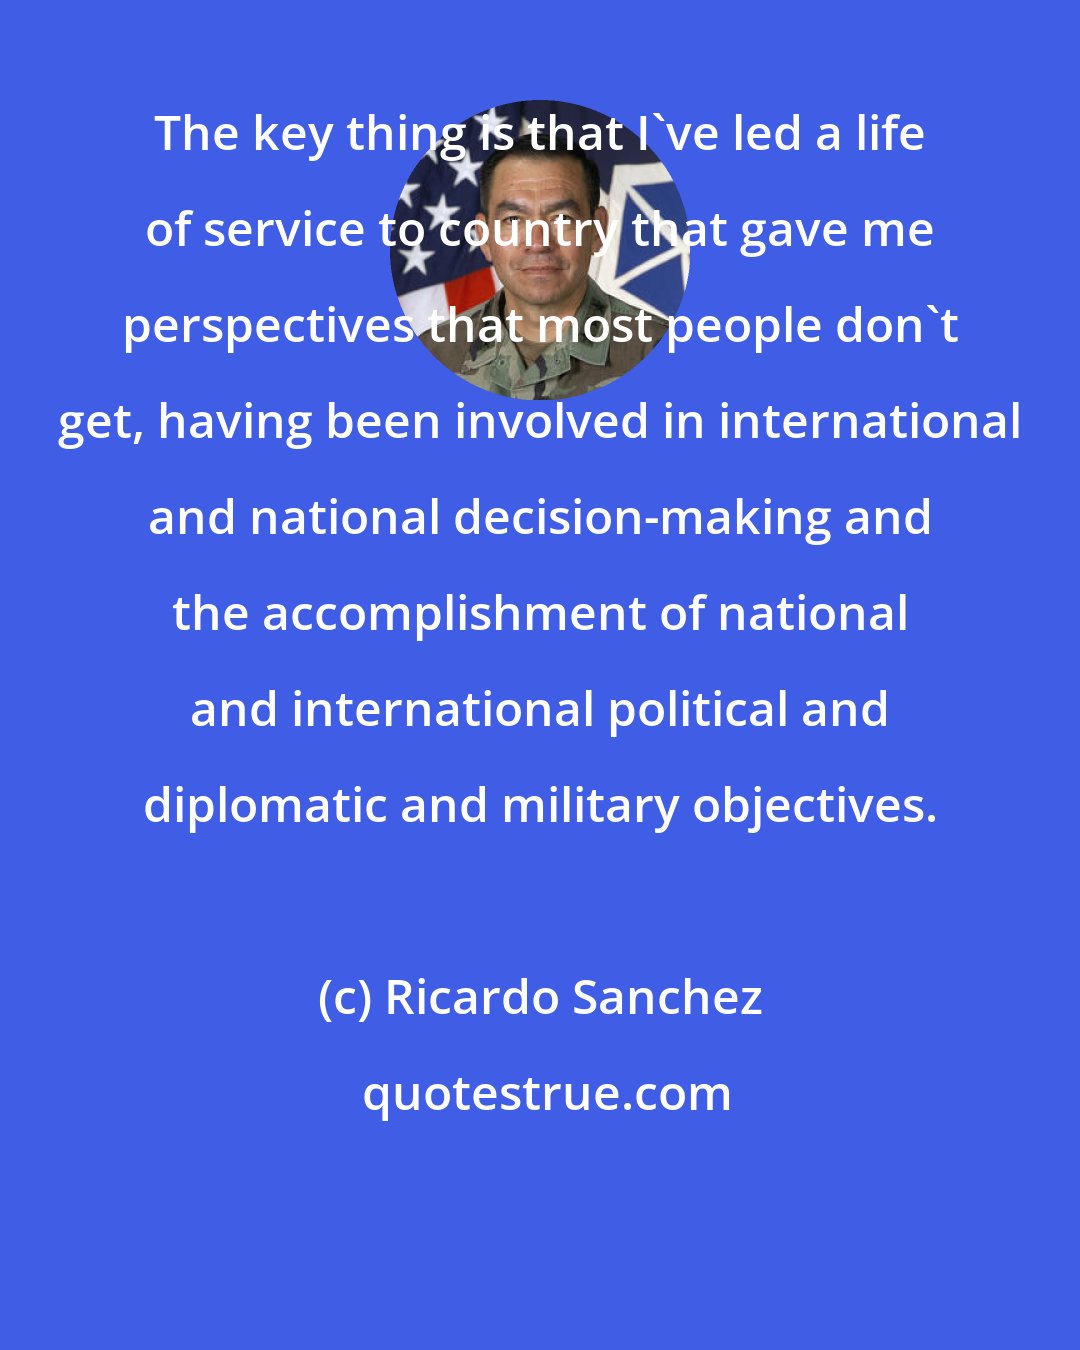 Ricardo Sanchez: The key thing is that I've led a life of service to country that gave me perspectives that most people don't get, having been involved in international and national decision-making and the accomplishment of national and international political and diplomatic and military objectives.